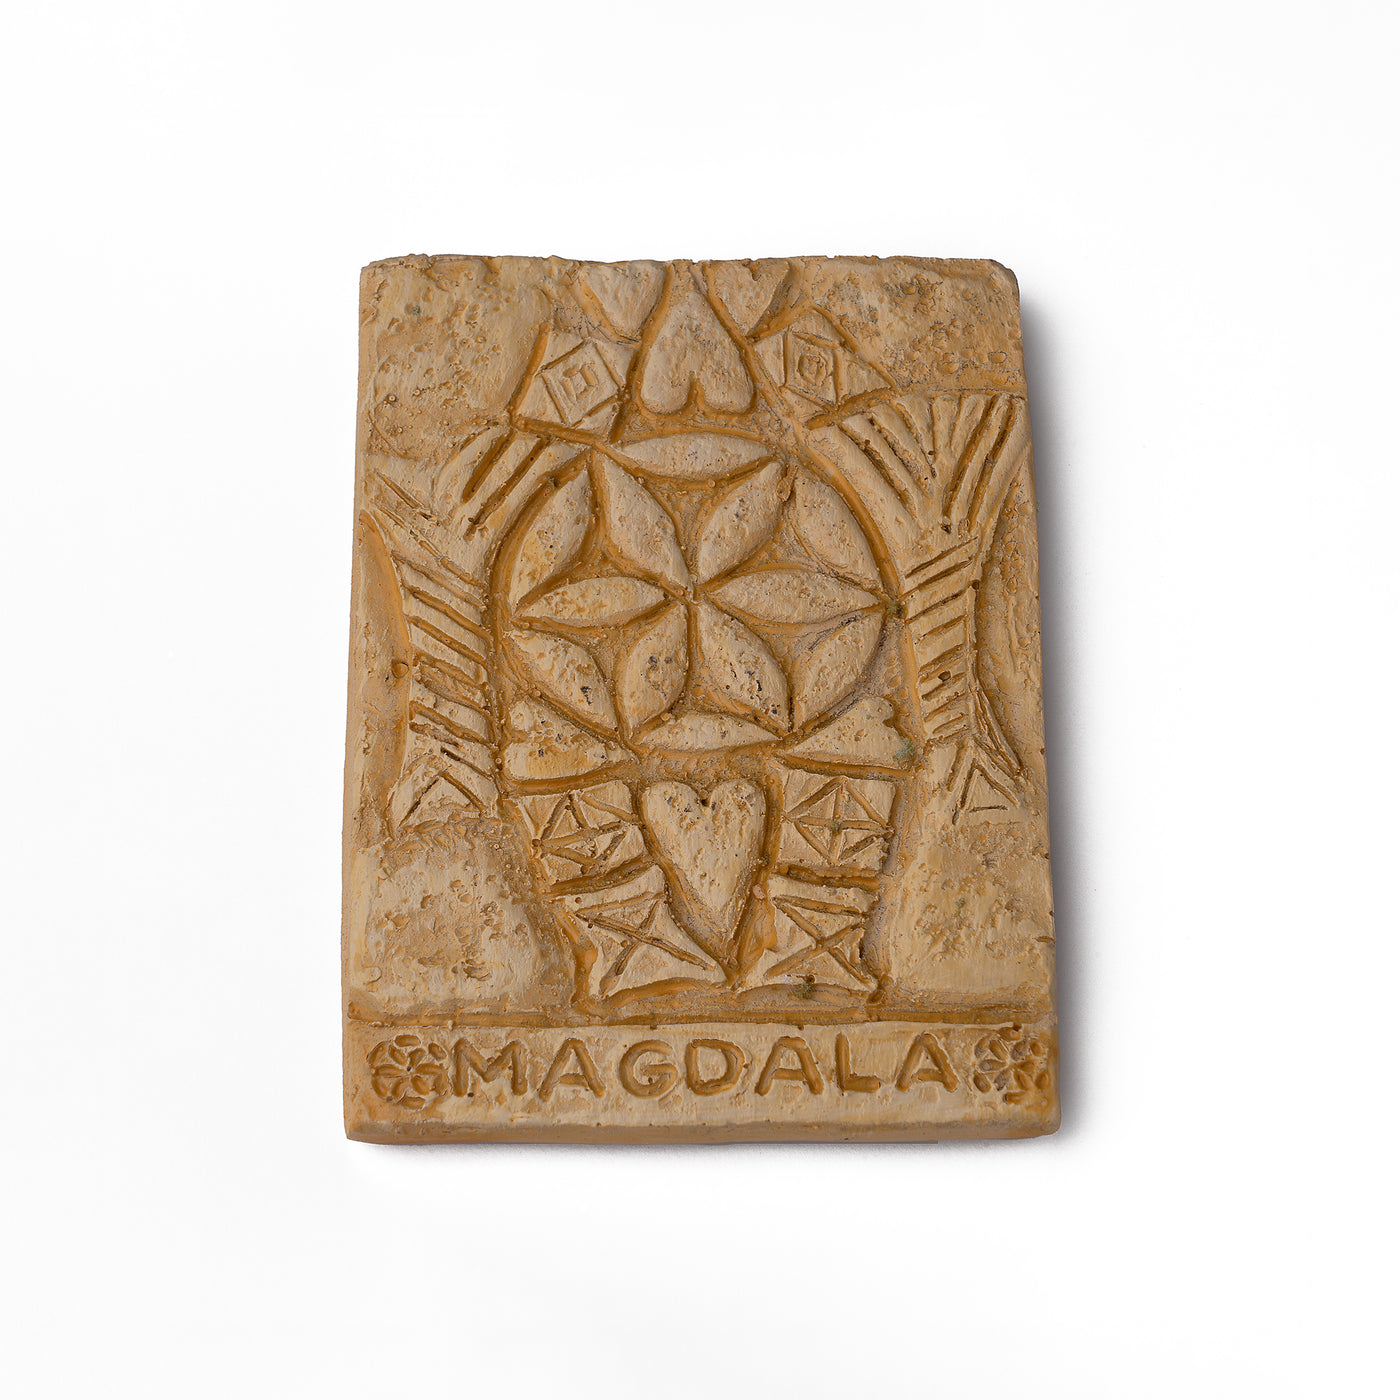 MAGDALA STONE MAGNET - The 2nd Temple Holy of Holies Rossette